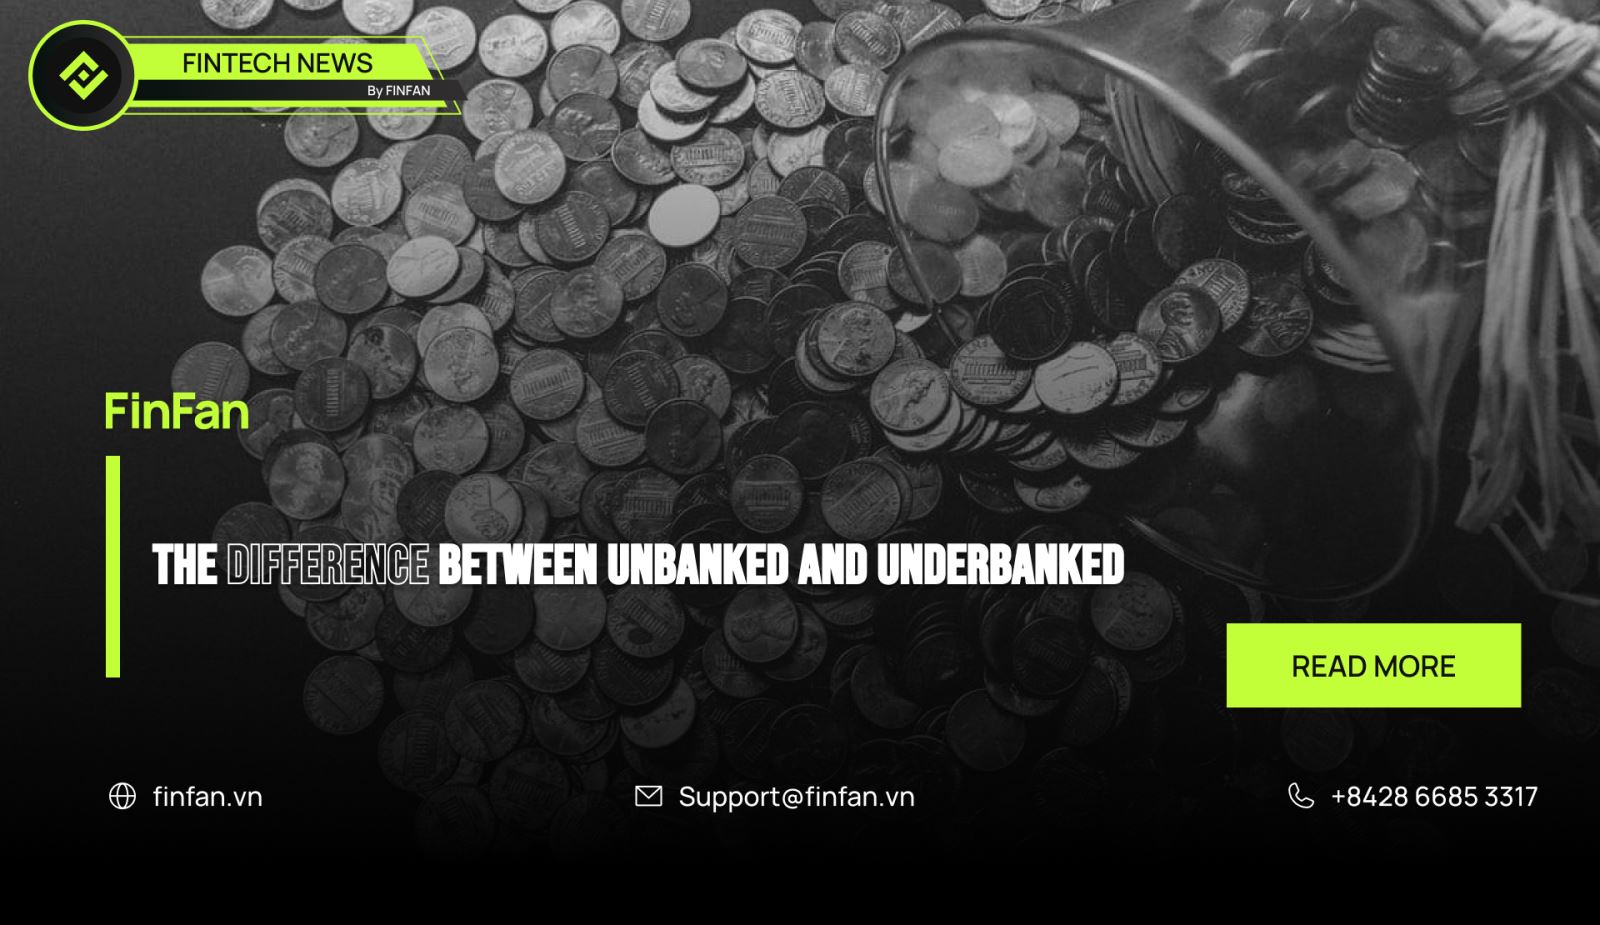 The difference between unbanked and underbanked